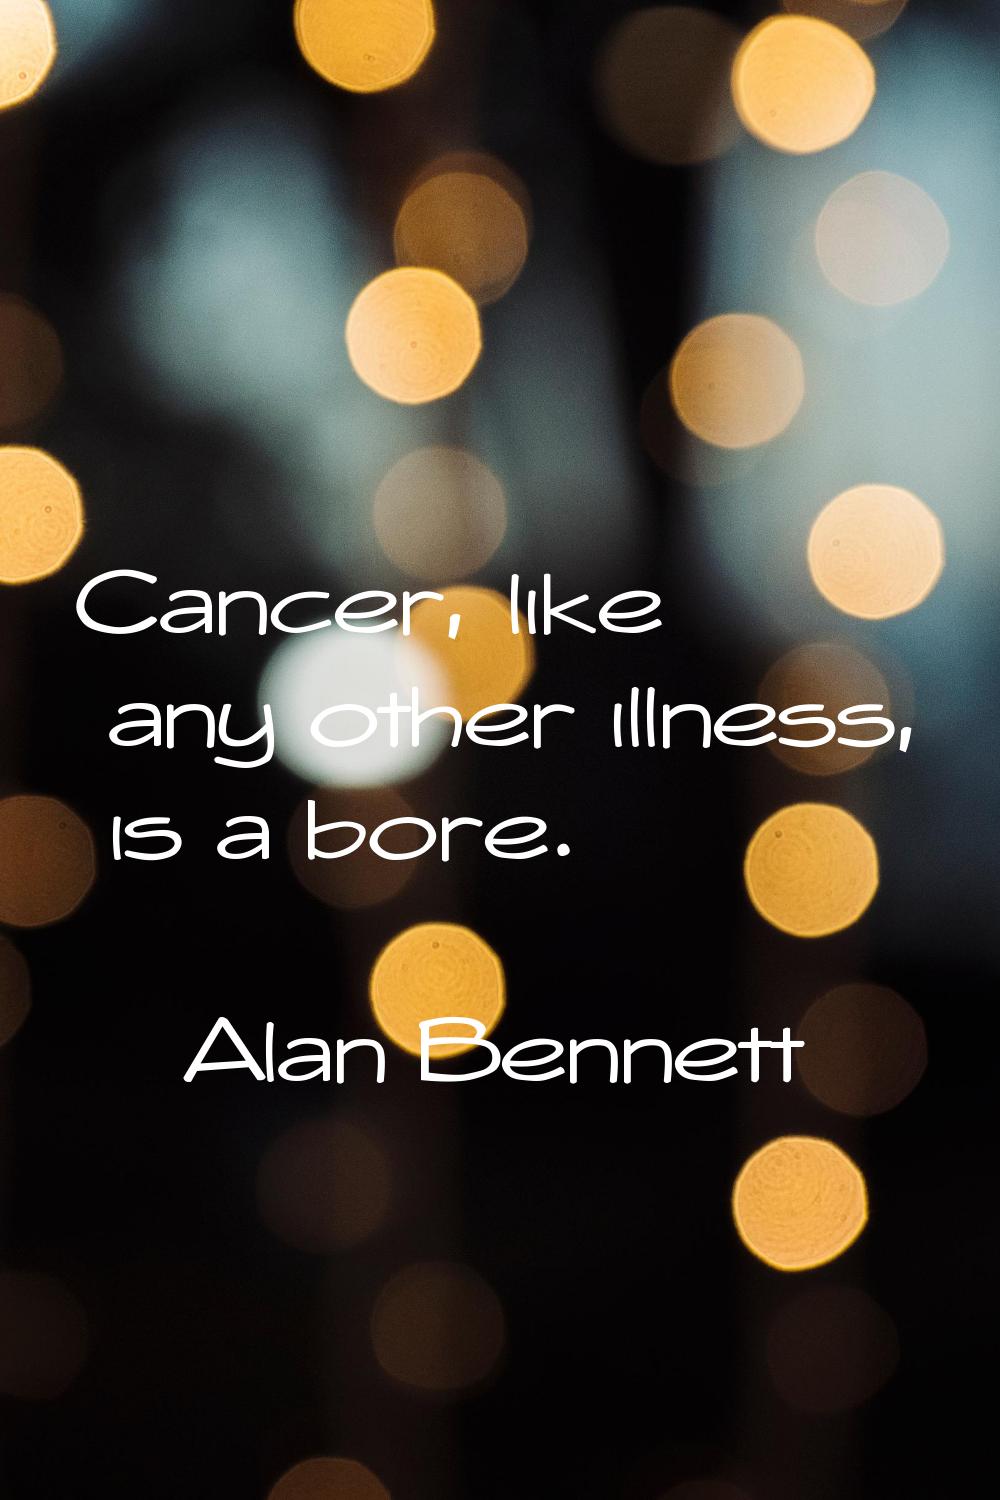 Cancer, like any other illness, is a bore.